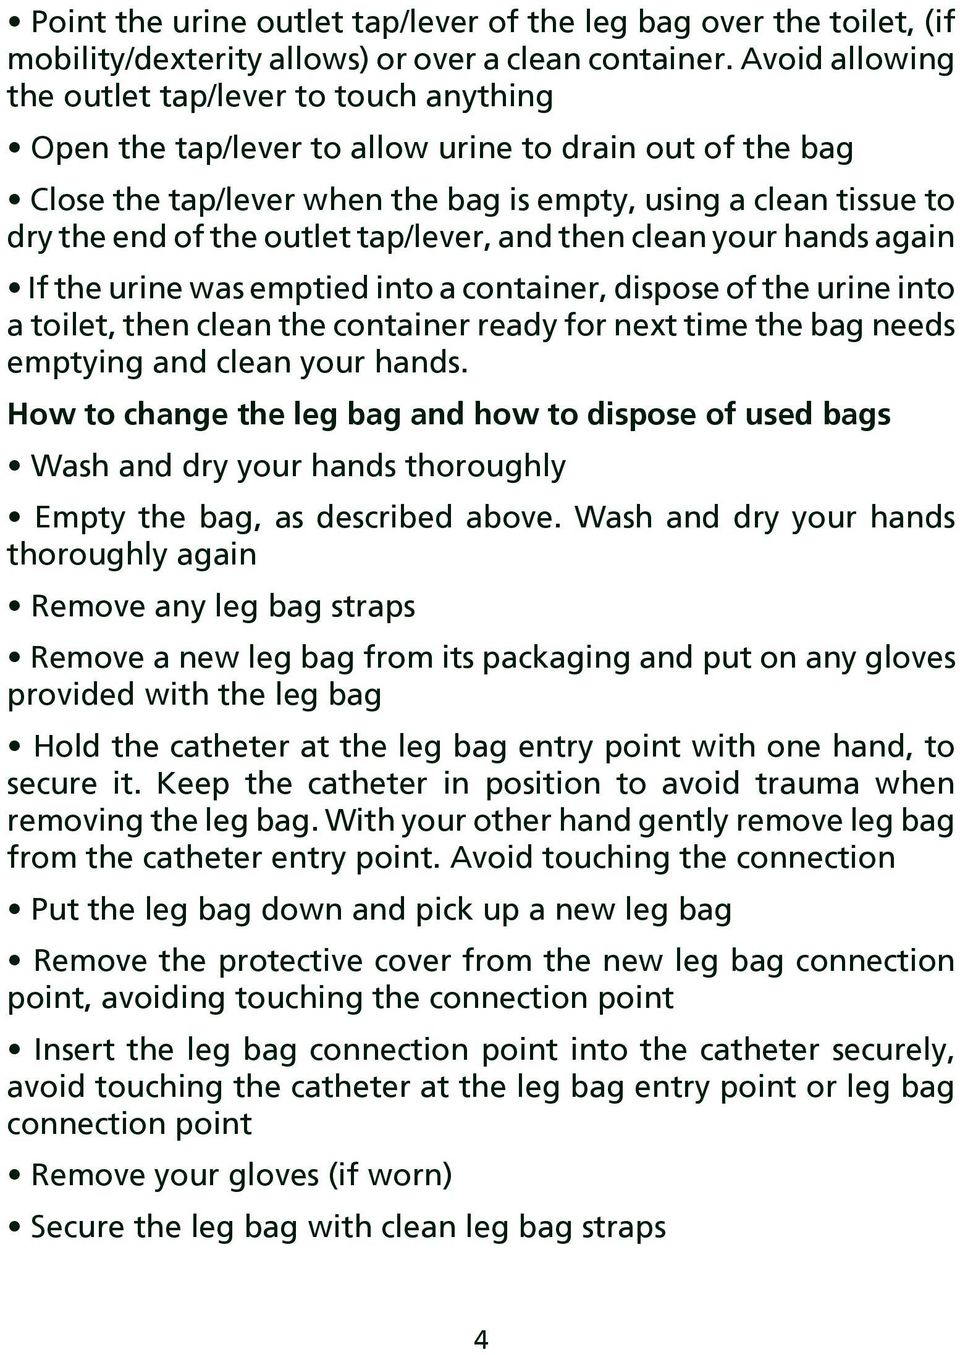 outlet tap/lever, and then clean your hands again If the urine was emptied into a container, dispose of the urine into a toilet, then clean the container ready for next time the bag needs emptying